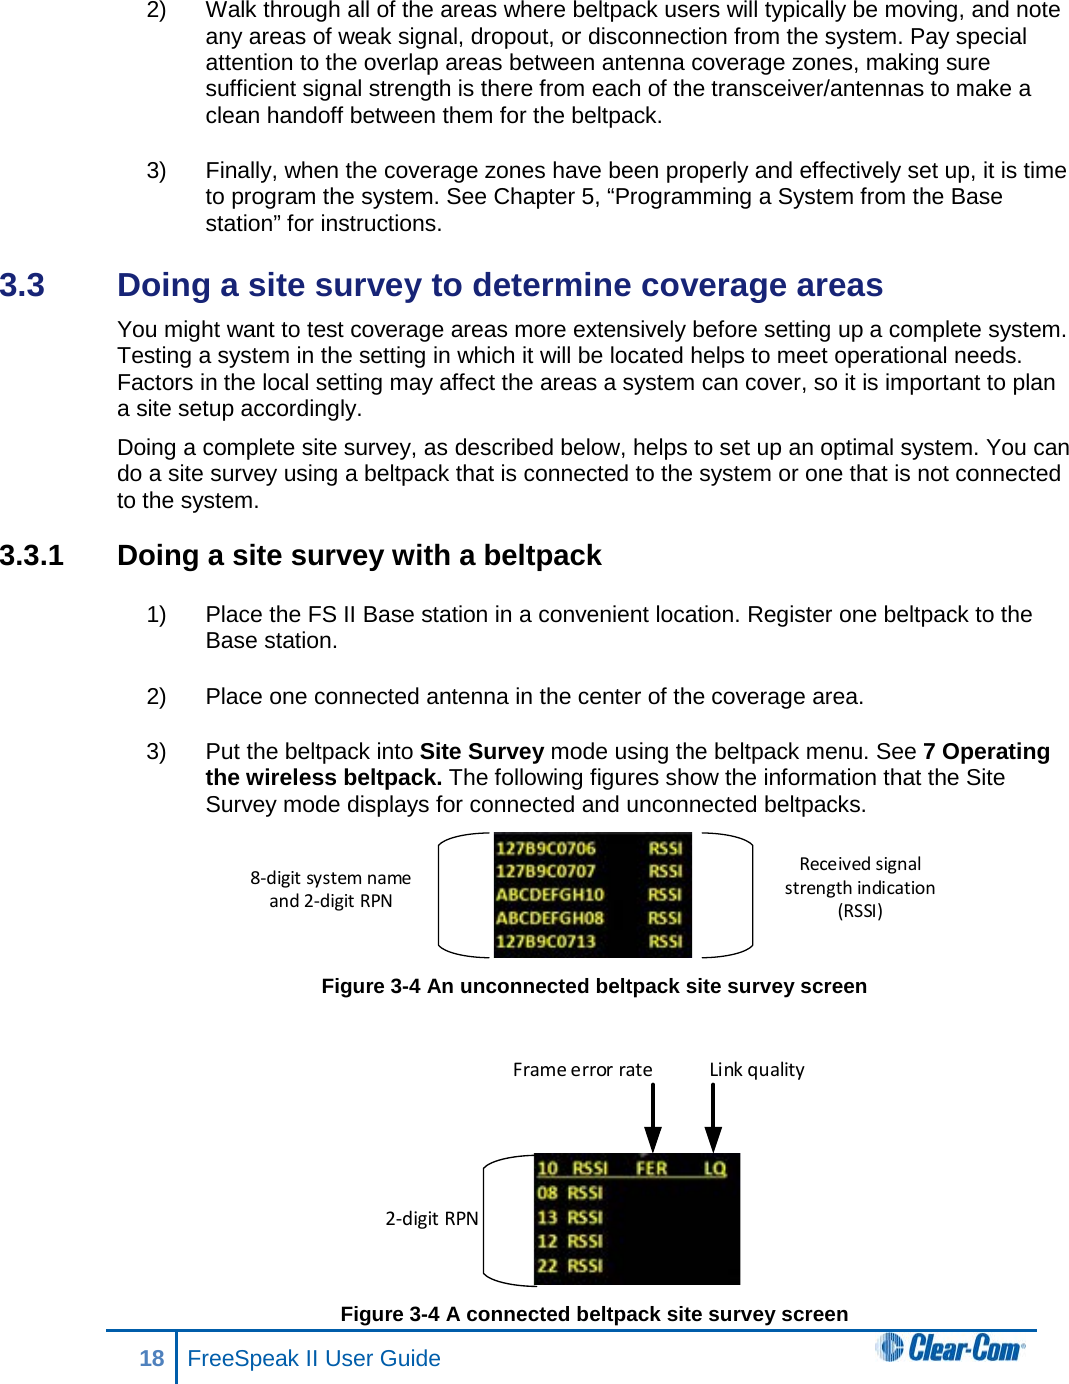 2) Walk through all of the areas where beltpack users will typically be moving, and note any areas of weak signal, dropout, or disconnection from the system. Pay special attention to the overlap areas between antenna coverage zones, making sure sufficient signal strength is there from each of the transceiver/antennas to make a clean handoff between them for the beltpack.  3) Finally, when the coverage zones have been properly and effectively set up, it is time to program the system. See Chapter 5, “Programming a System from the Base station” for instructions. 3.3  Doing a site survey to determine coverage areas  You might want to test coverage areas more extensively before setting up a complete system. Testing a system in the setting in which it will be located helps to meet operational needs. Factors in the local setting may affect the areas a system can cover, so it is important to plan a site setup accordingly. Doing a complete site survey, as described below, helps to set up an optimal system. You can do a site survey using a beltpack that is connected to the system or one that is not connected to the system. 3.3.1 Doing a site survey with a beltpack 1) Place the FS II Base station in a convenient location. Register one beltpack to the Base station.  2) Place one connected antenna in the center of the coverage area.  3) Put the beltpack into Site Survey mode using the beltpack menu. See 7 Operating the wireless beltpack. The following figures show the information that the Site Survey mode displays for connected and unconnected beltpacks.  Figure 3-4 An unconnected beltpack site survey screen    Figure 3-4 A connected beltpack site survey screen Received signal strength indication (RSSI)8-digit system name and 2-digit RPN2-digit RPNFrame error rate Link quality18 FreeSpeak II User Guide   